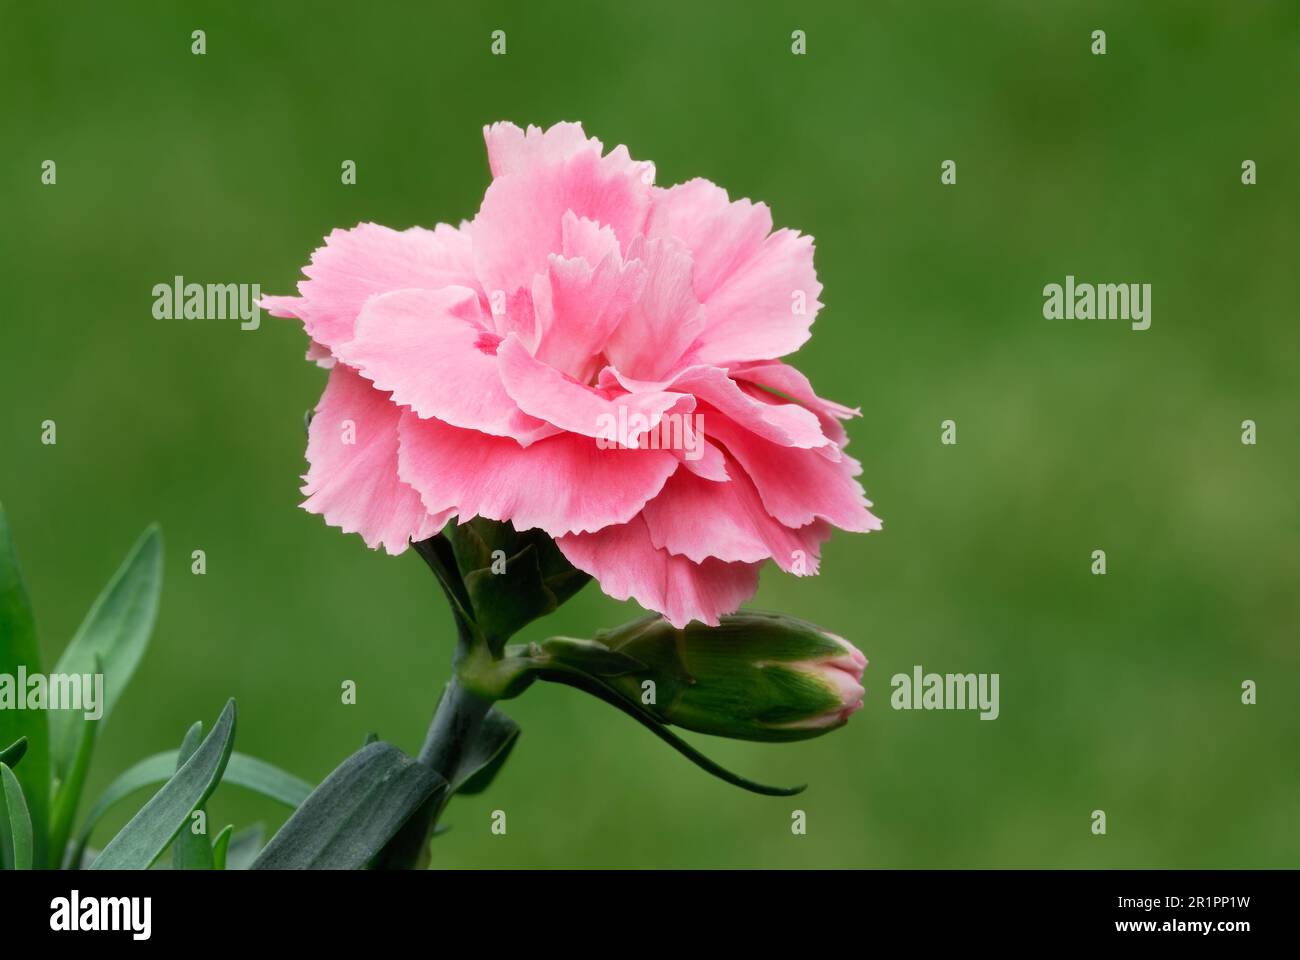 Carnation flower Dianthus caryophyllus, also called grenadine or clove pink Herbaceous plant. Blurred natural green background.  Trencin, Slovakia Stock Photo